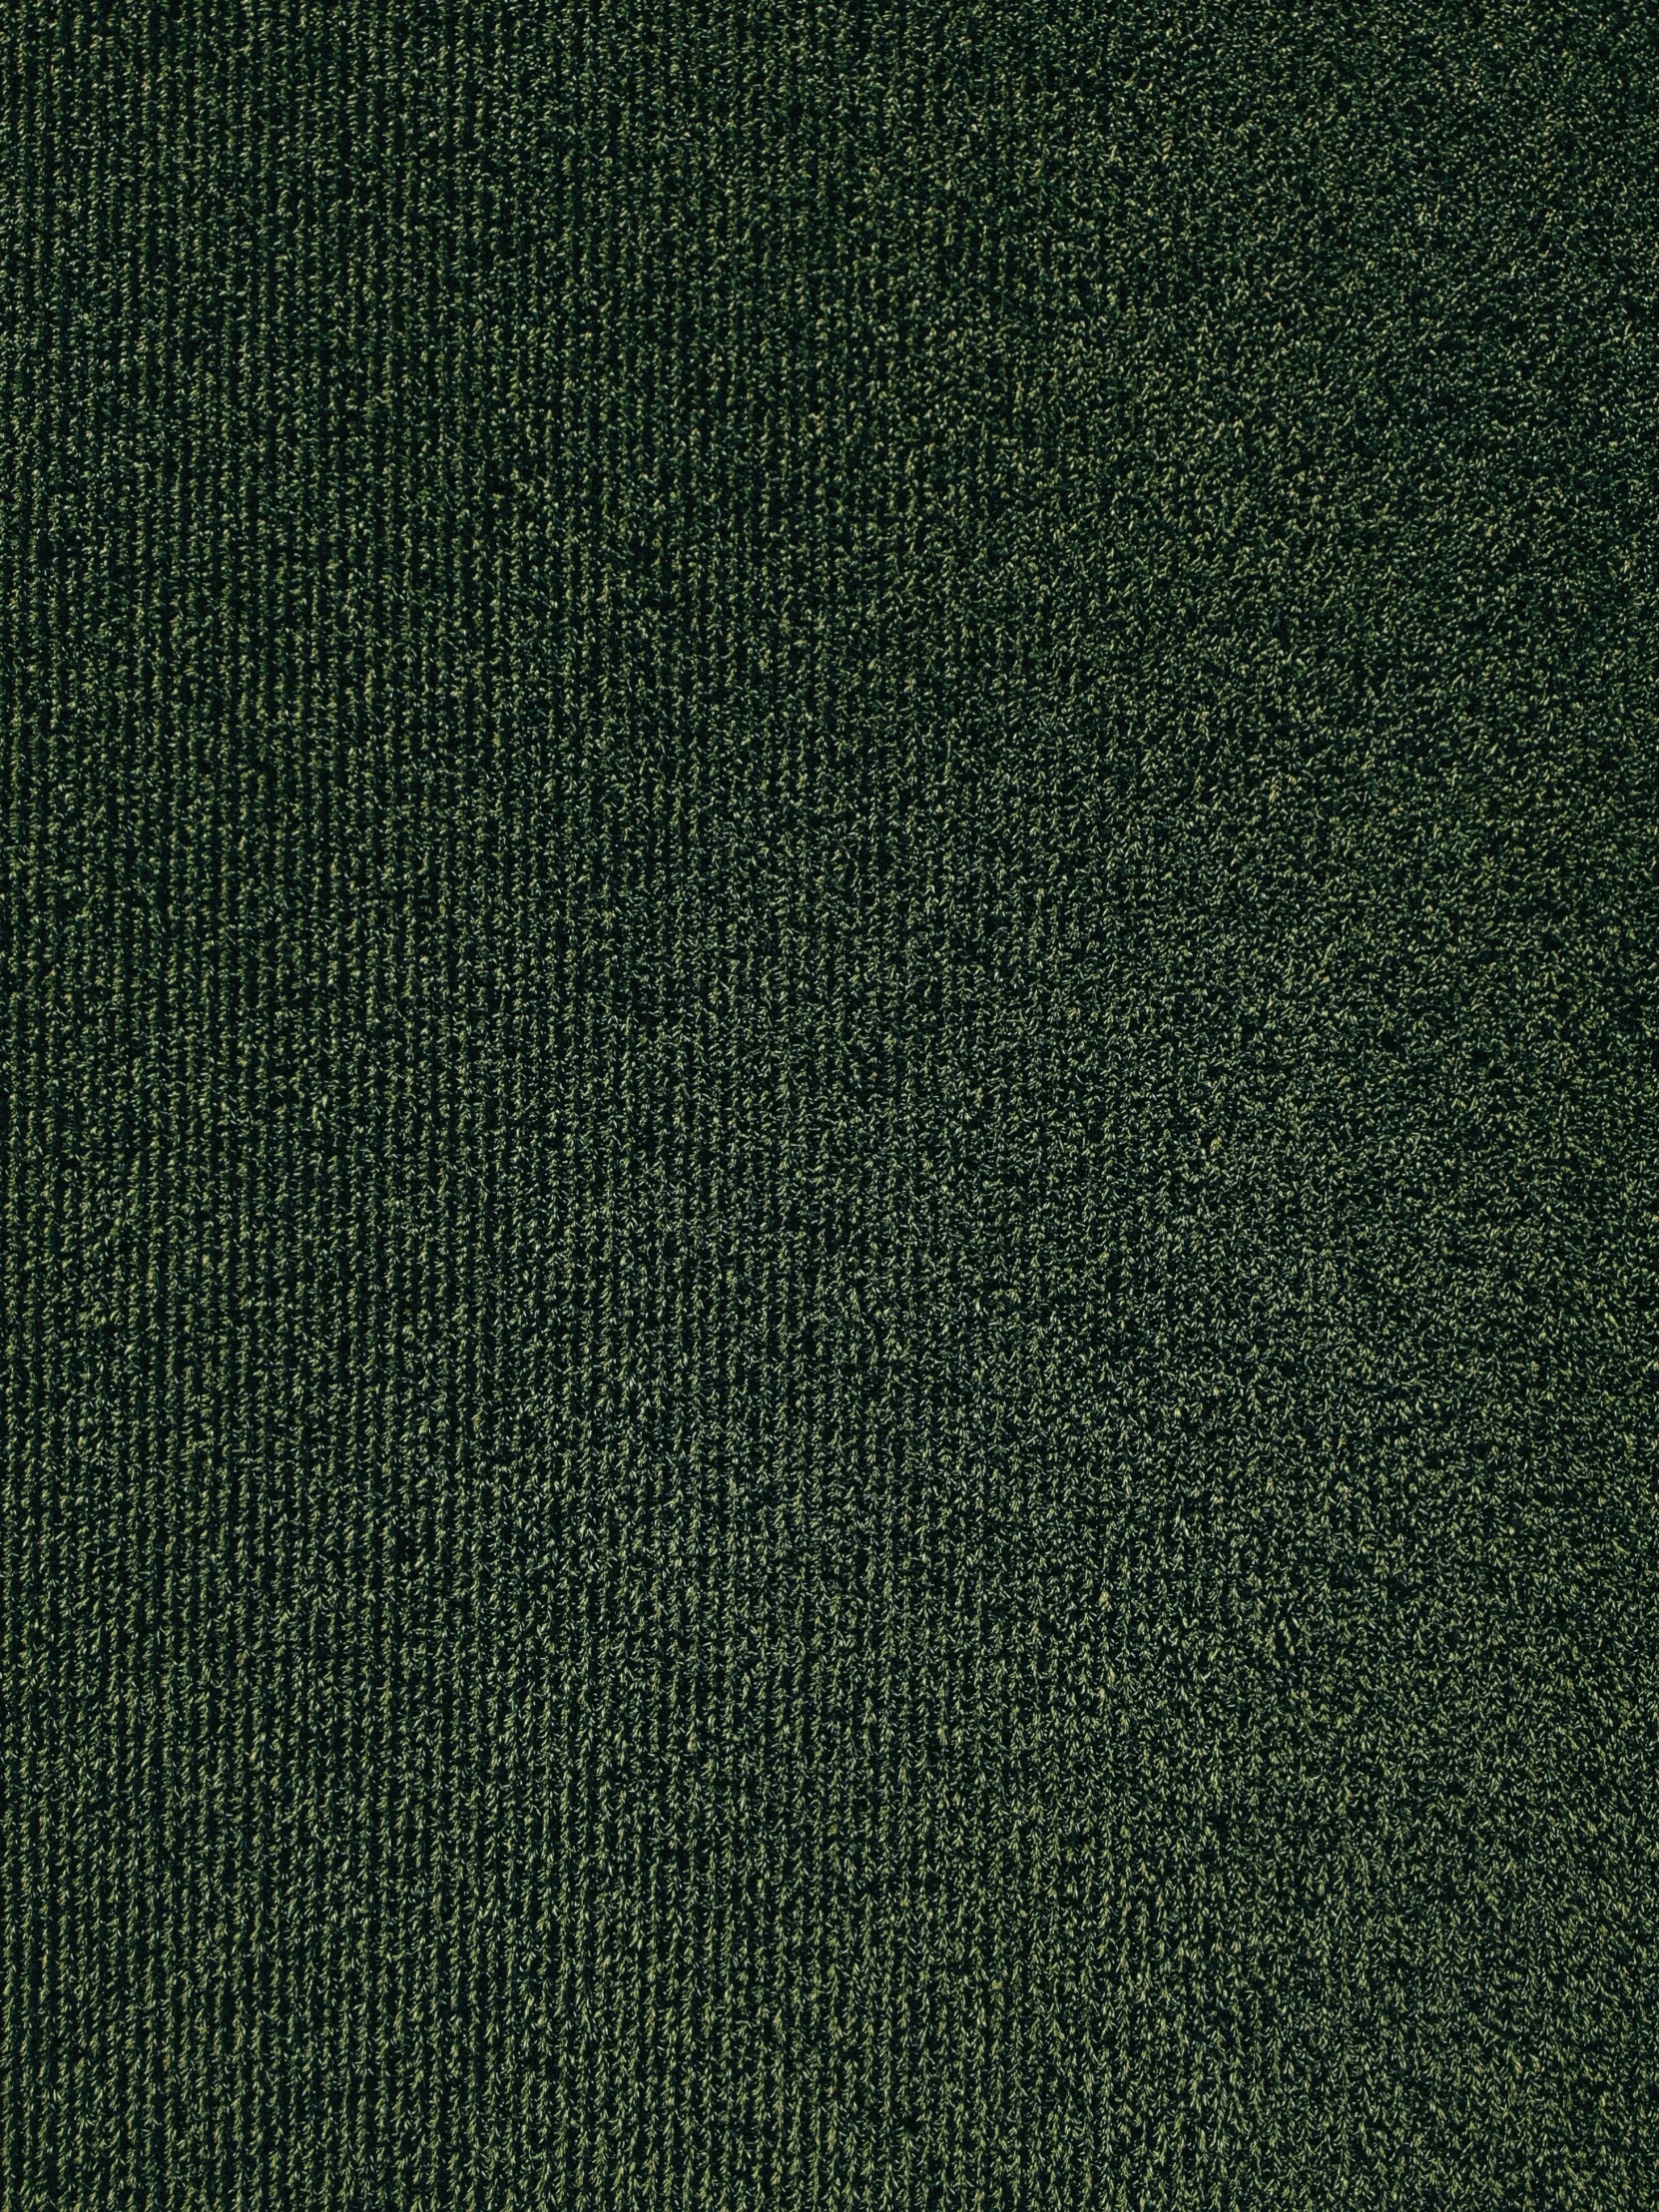 a textured dark green cloth from a blanket